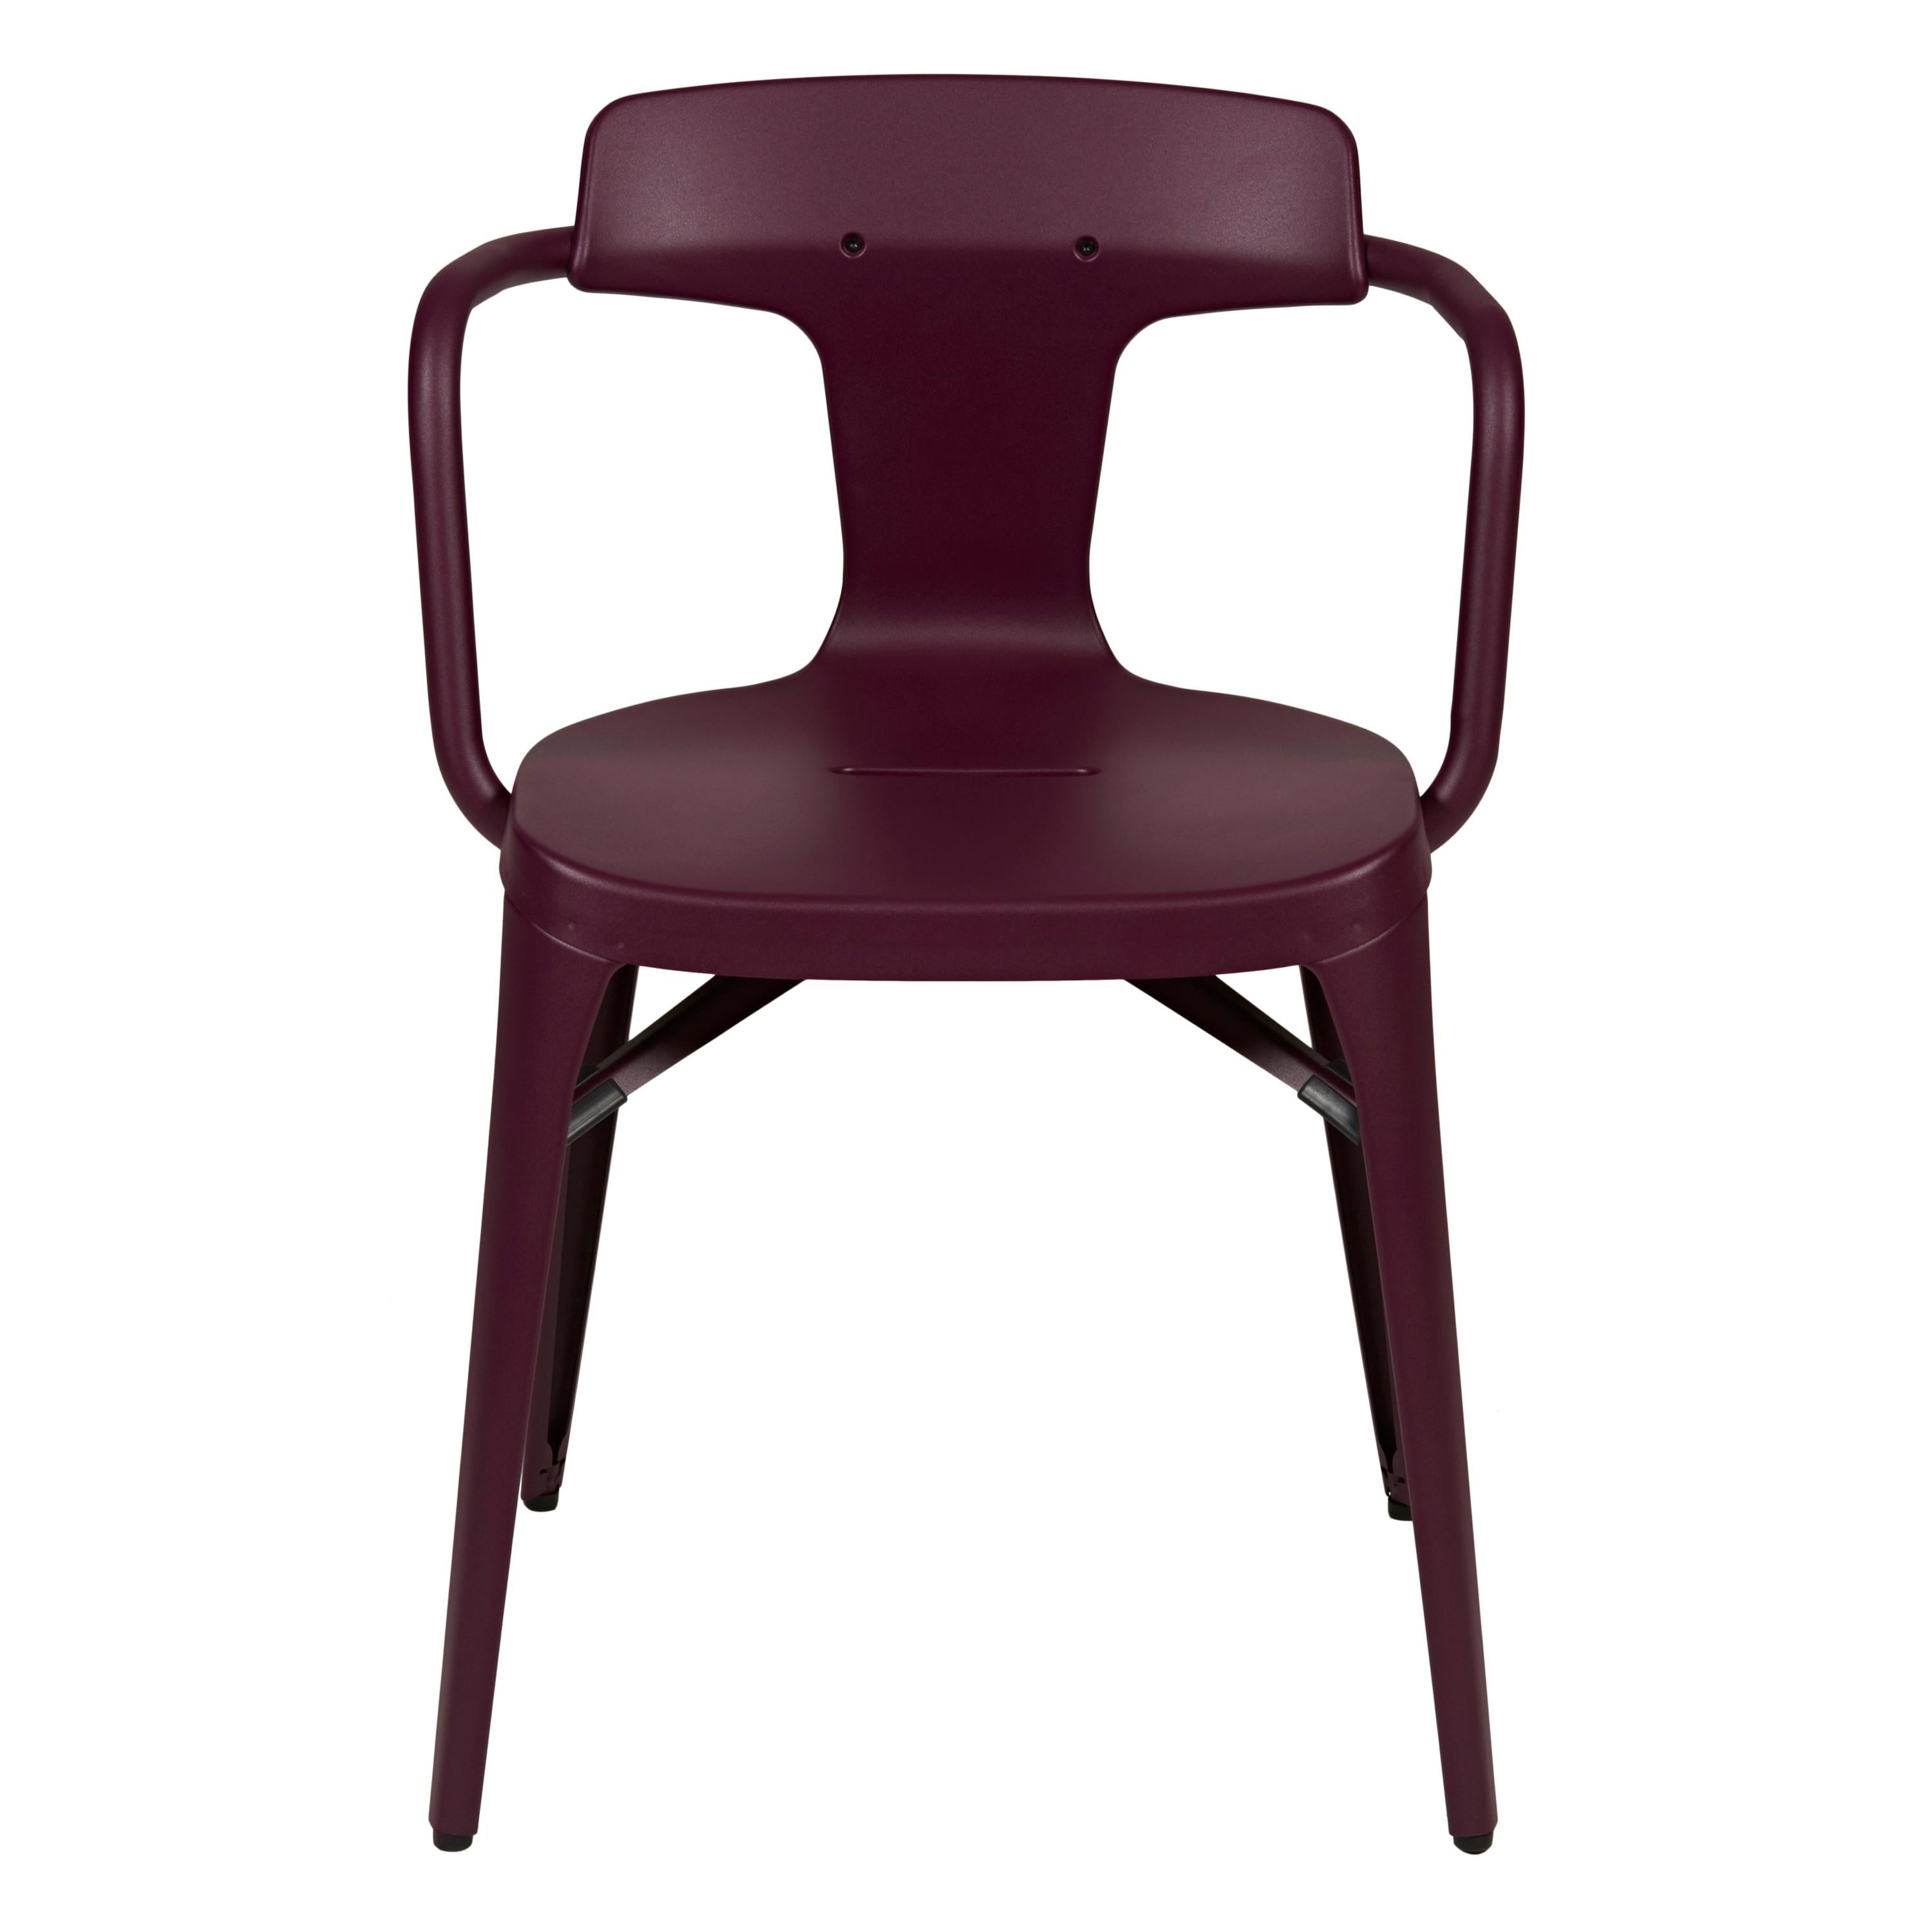 Im Angebot: T14 Chair in Pop Colors by Patrick Norguet and Tolix, Purple (Aubergine)